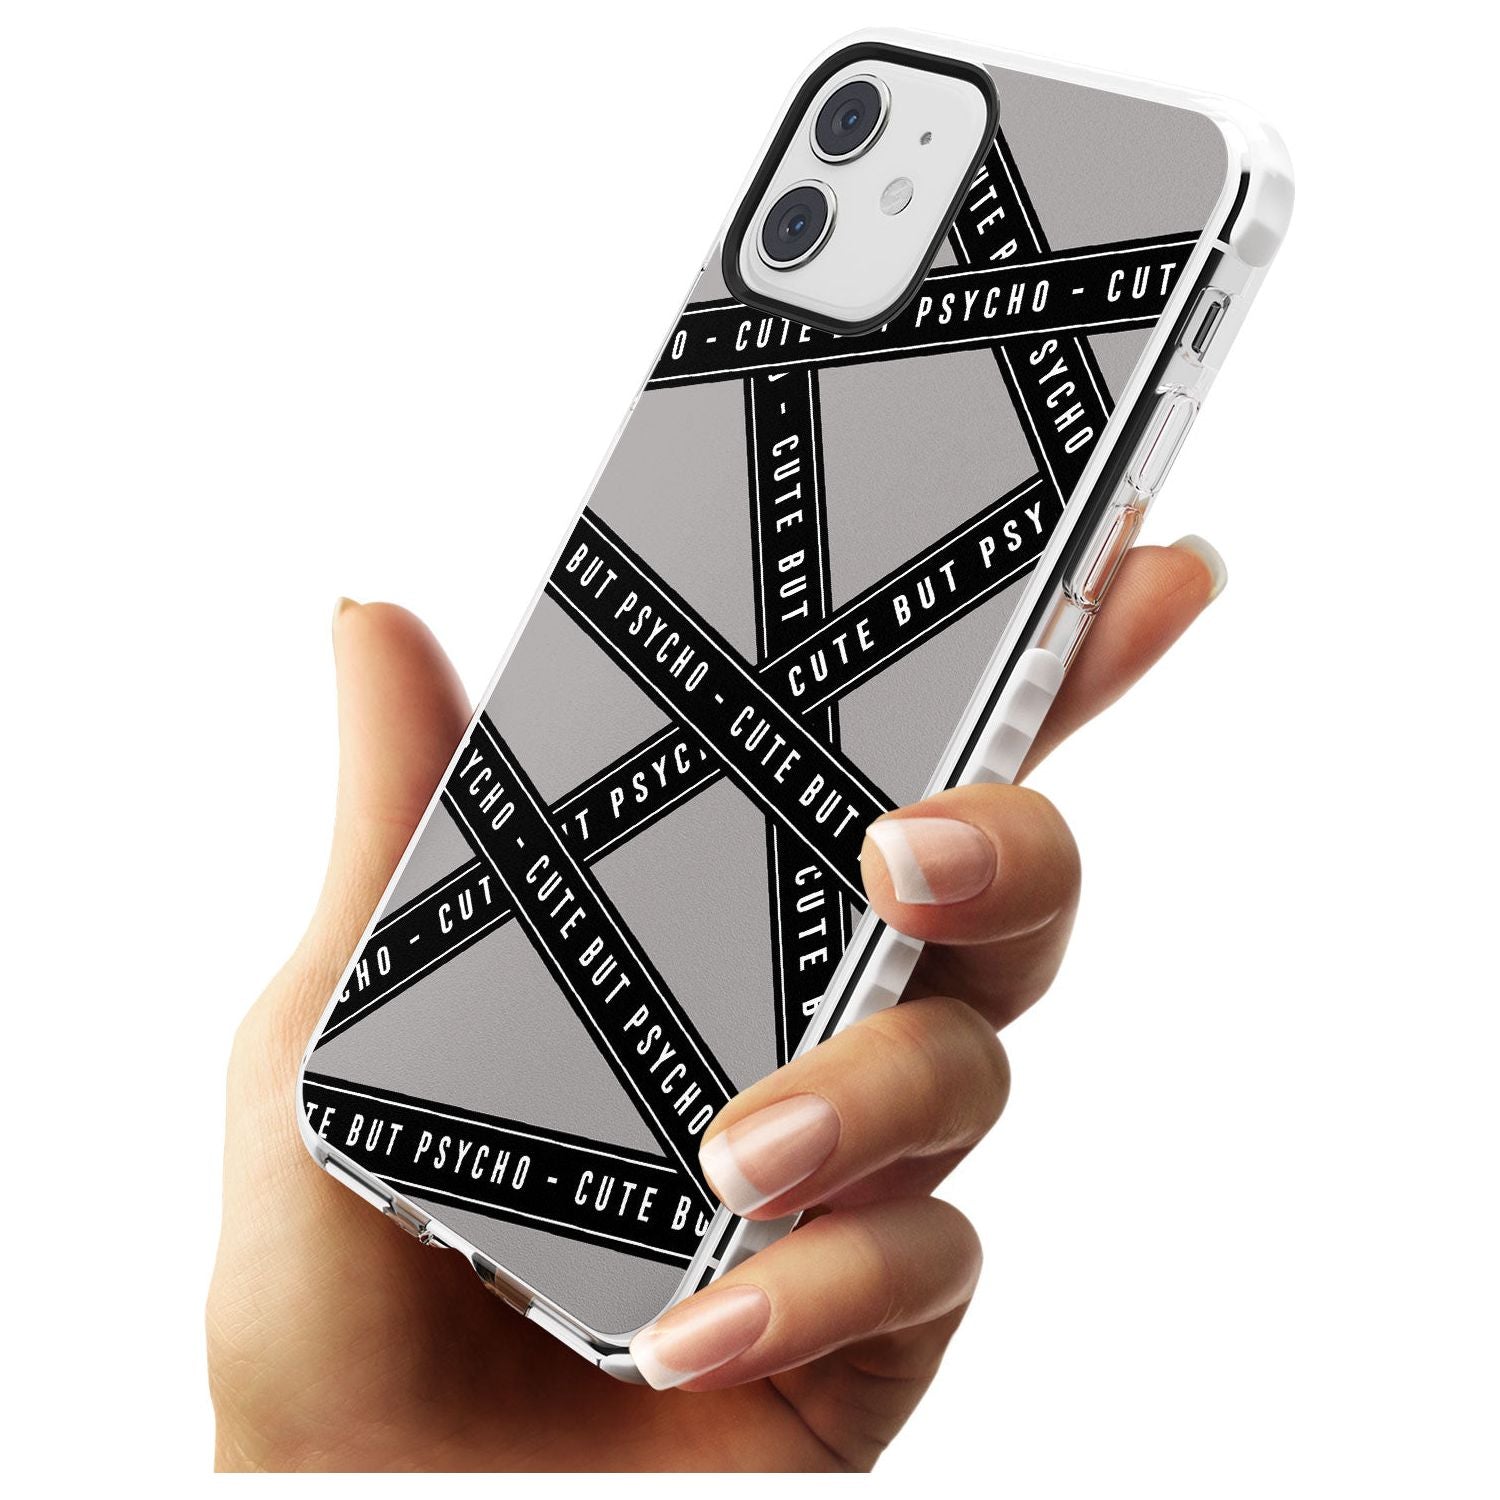 Caution Tape Phrases Cute But Psycho Impact Phone Case for iPhone 11